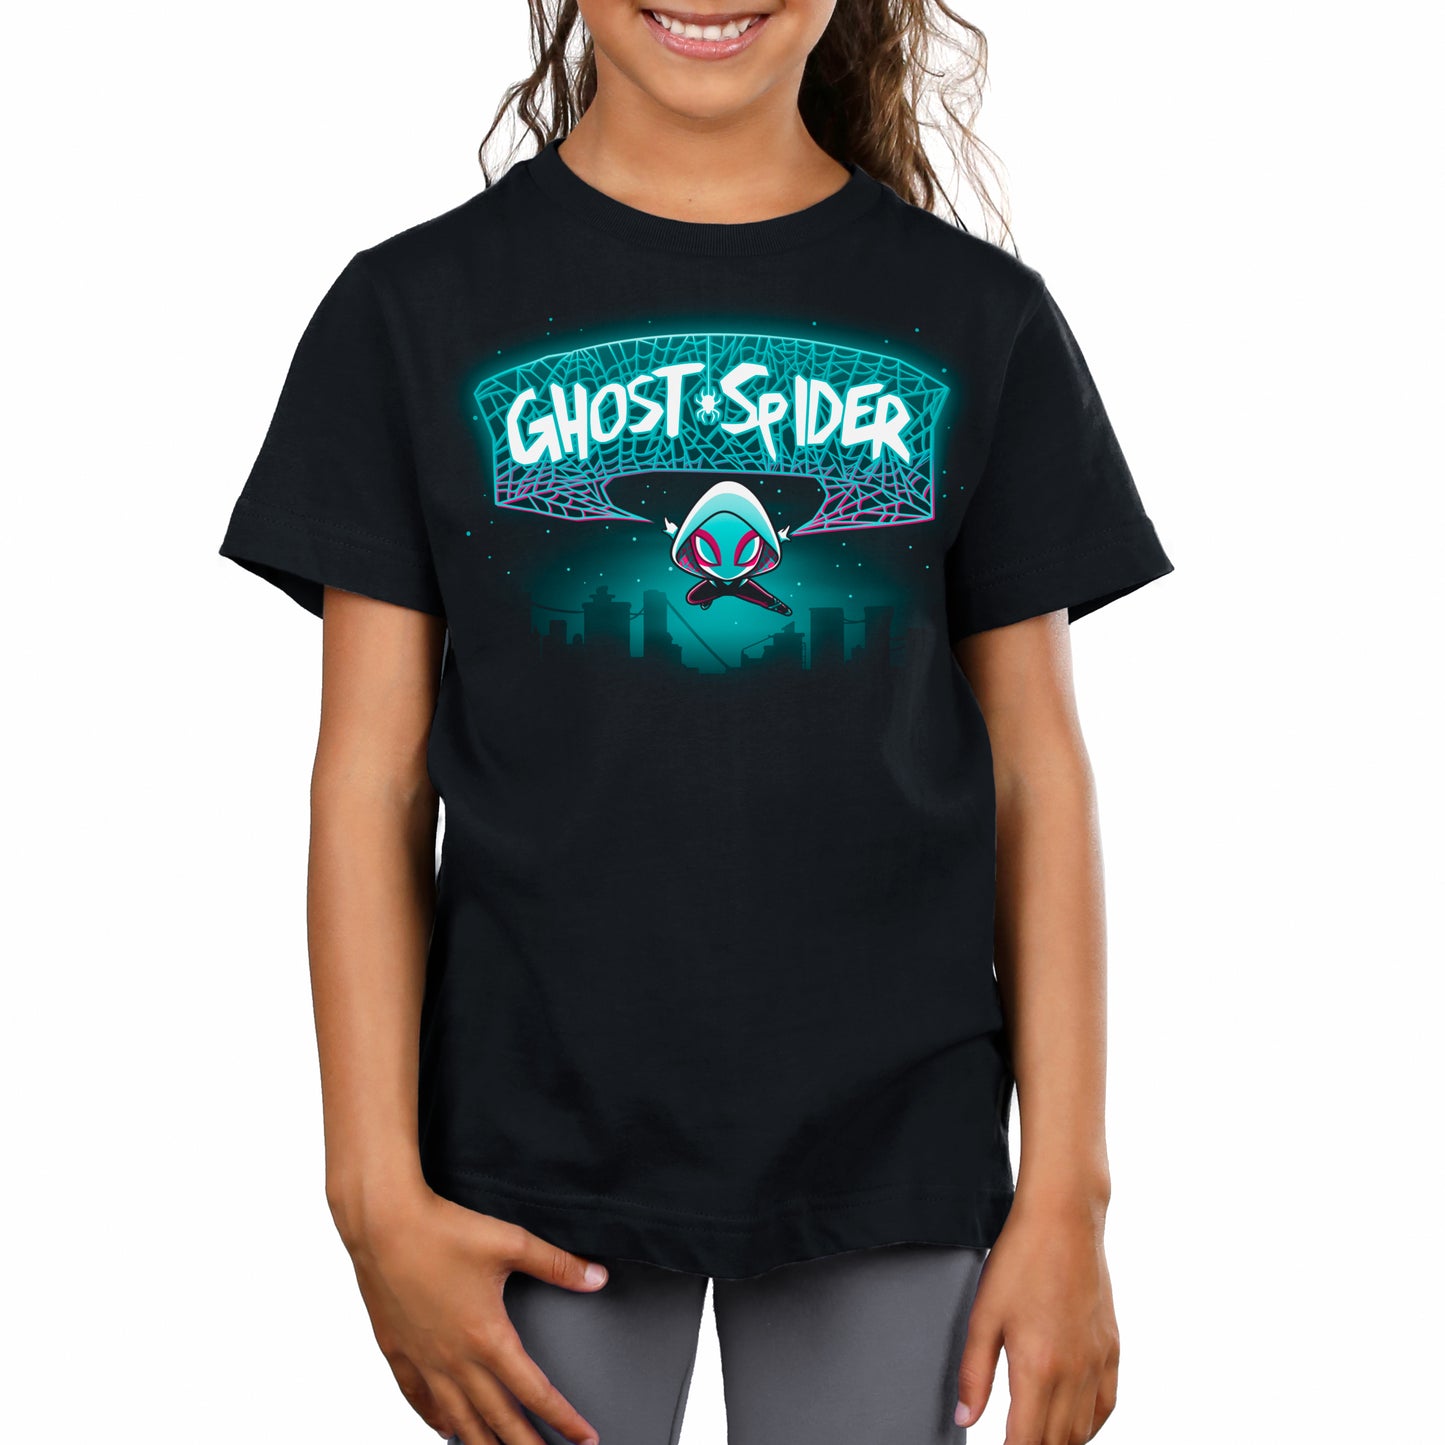 A girl wearing an officially licensed Marvel Ghost-Spider T-shirt.